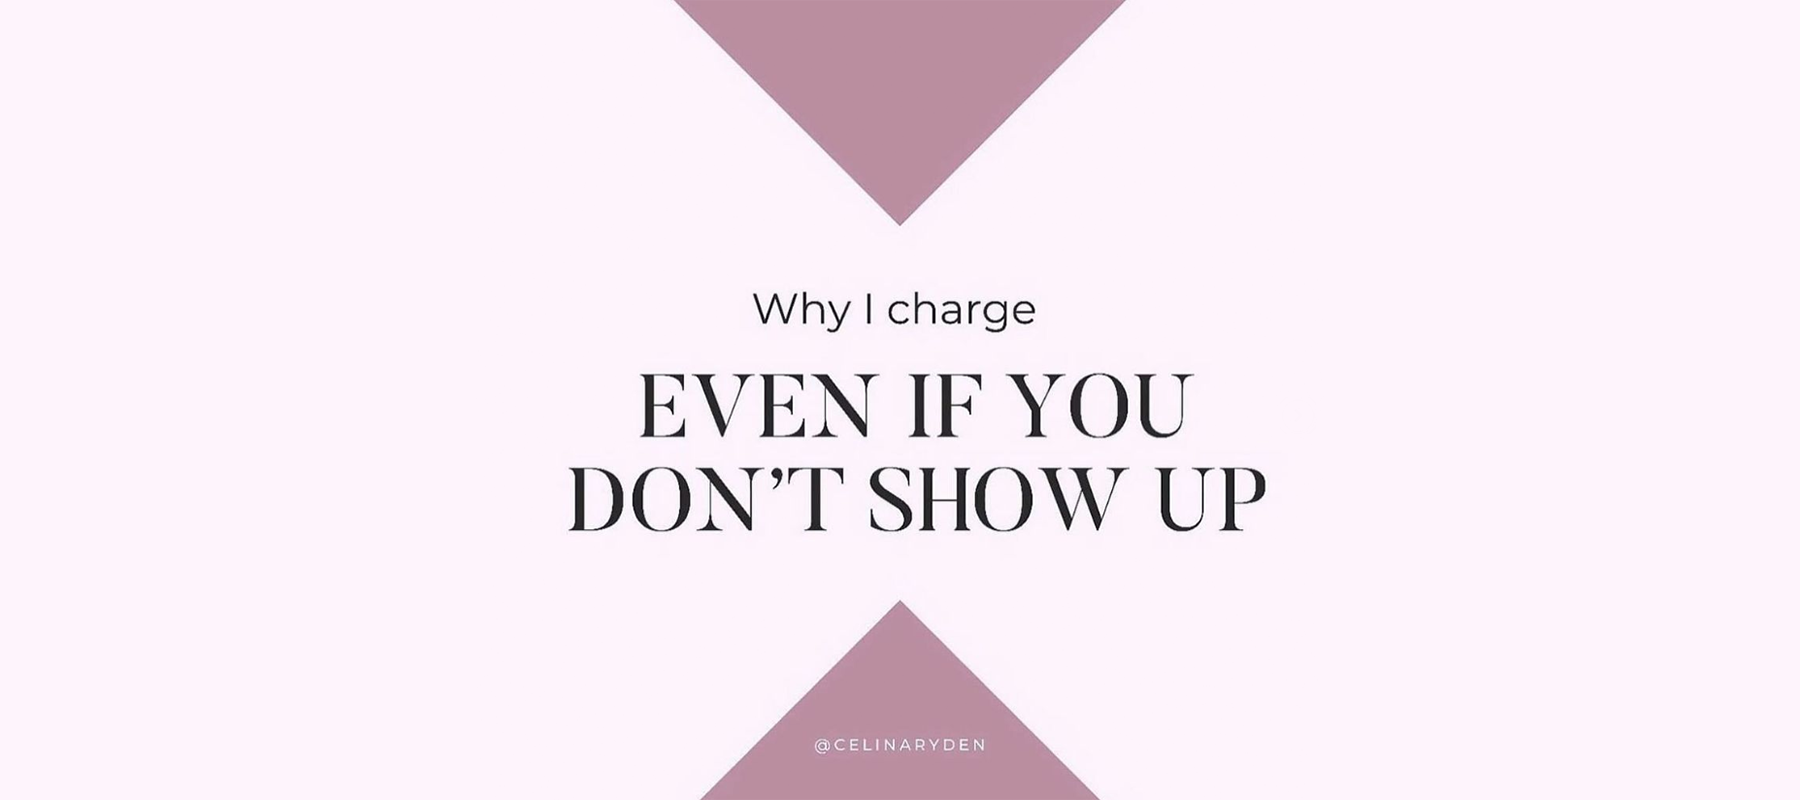 Why I Charge Even If You Don't Show Up - Nail Artist & Influencer, Celina Rydén Shares Her Experience